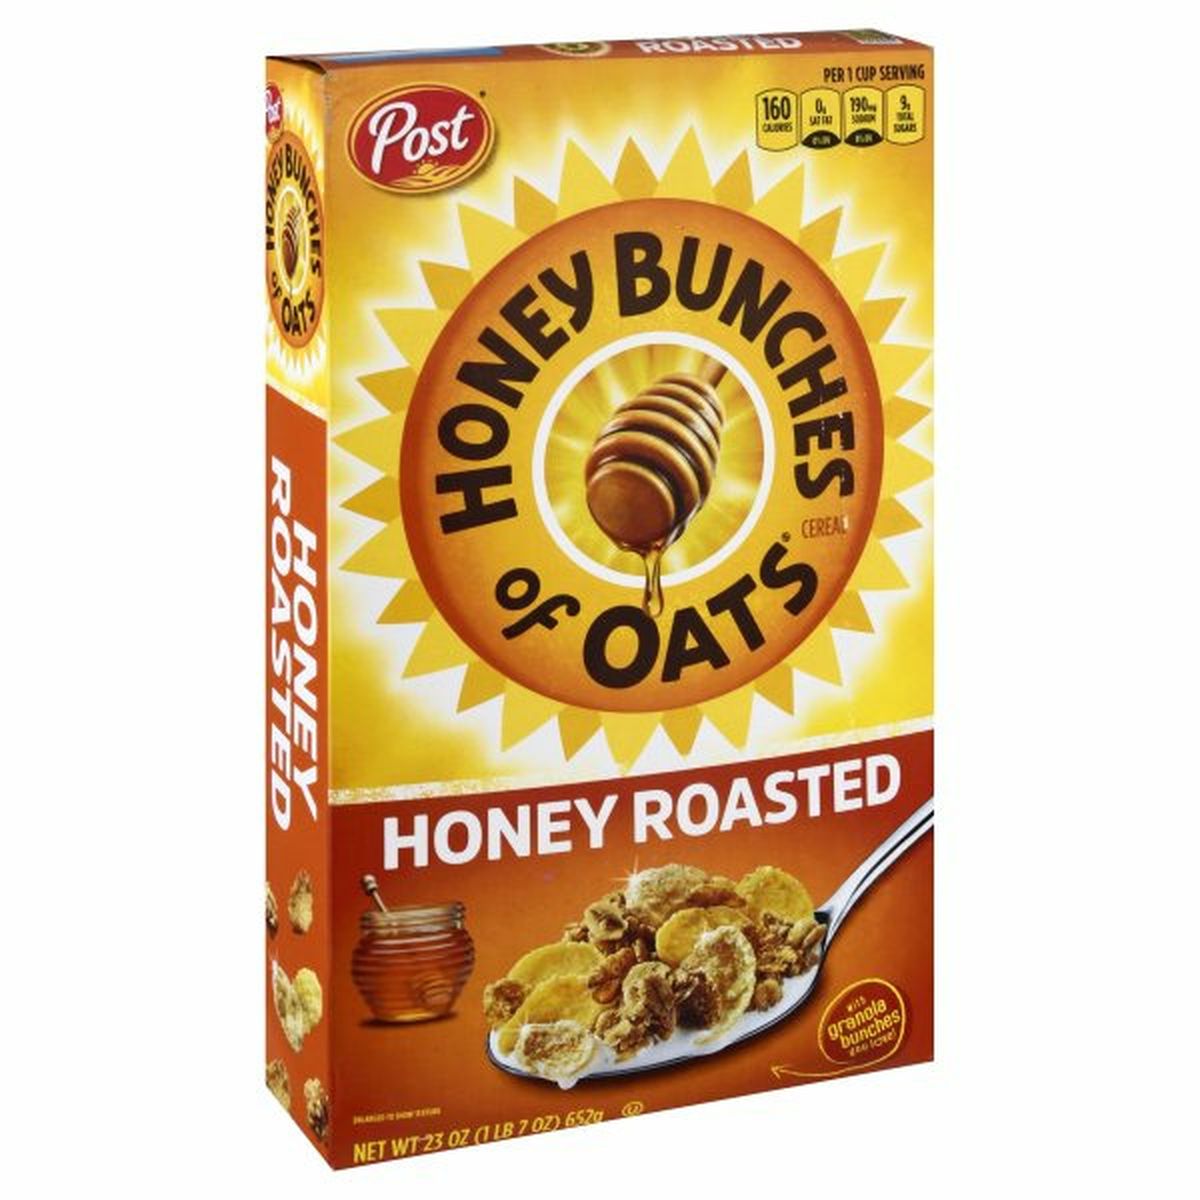 Calories in Post Cereal, Honey Roasted